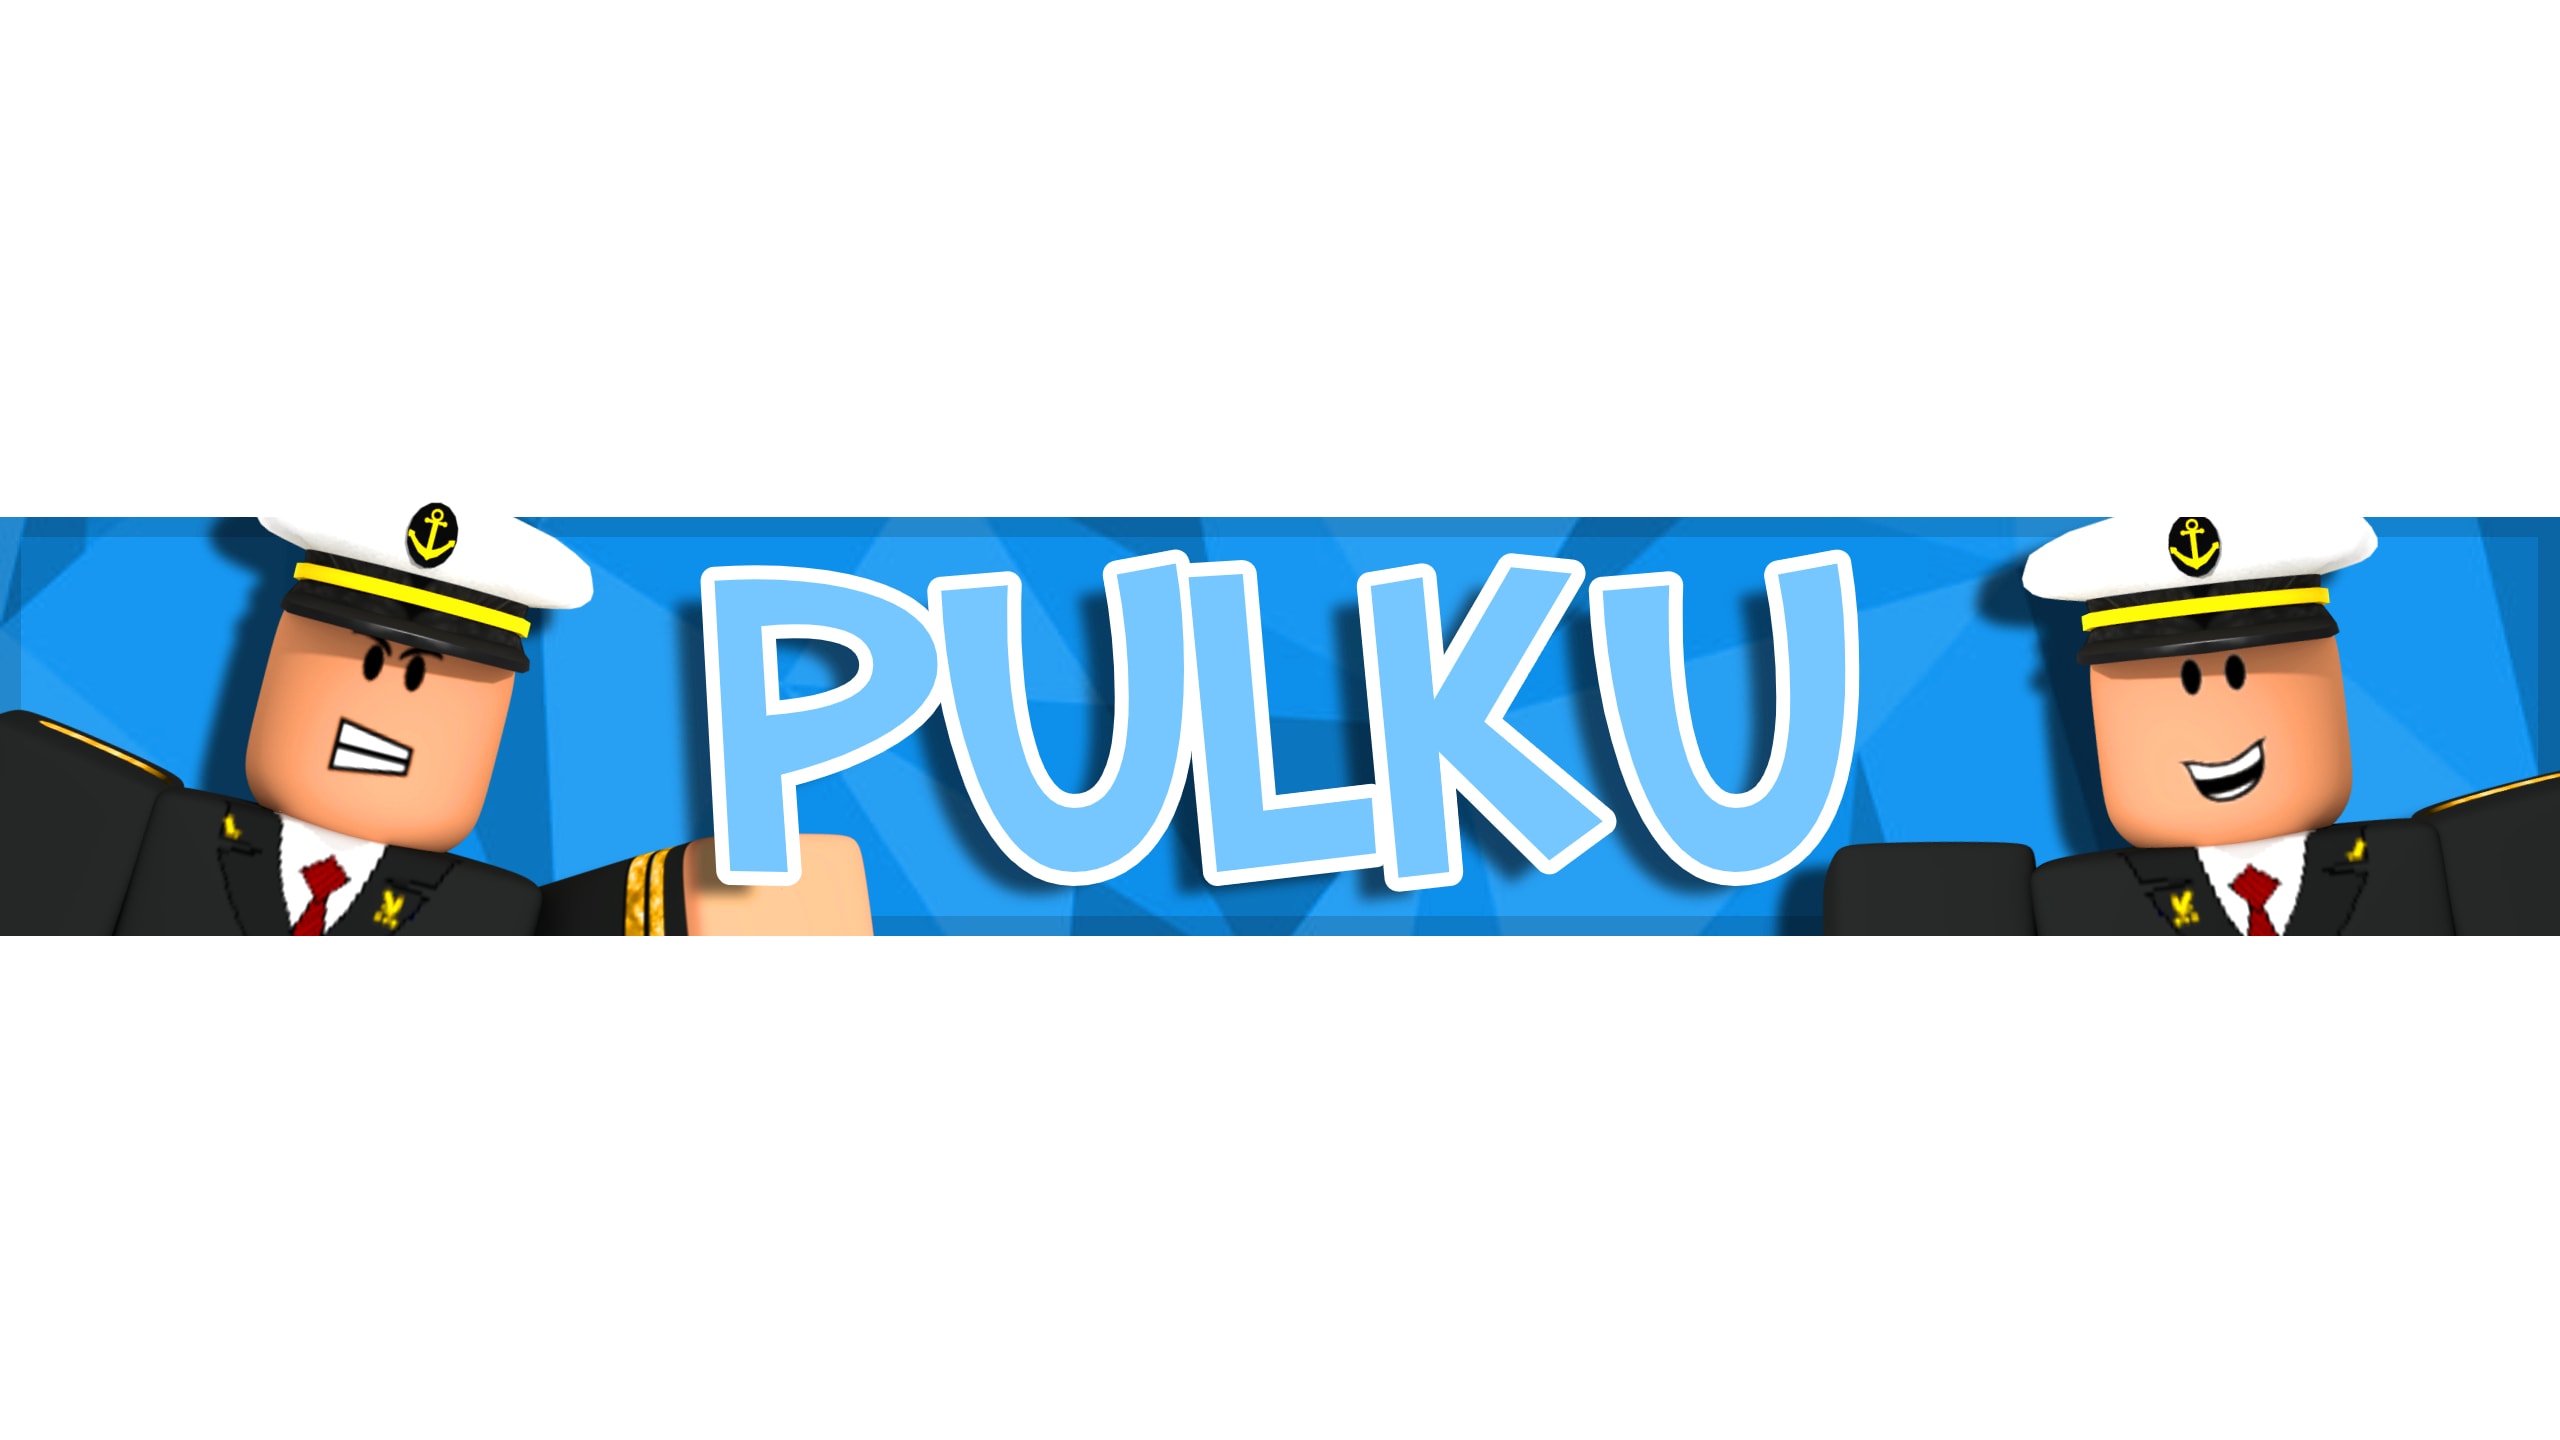 Make You A Custom Gfx Roblox Youtube Banner Or Channel Art By Pulku1 - youtube channel shirts roblox